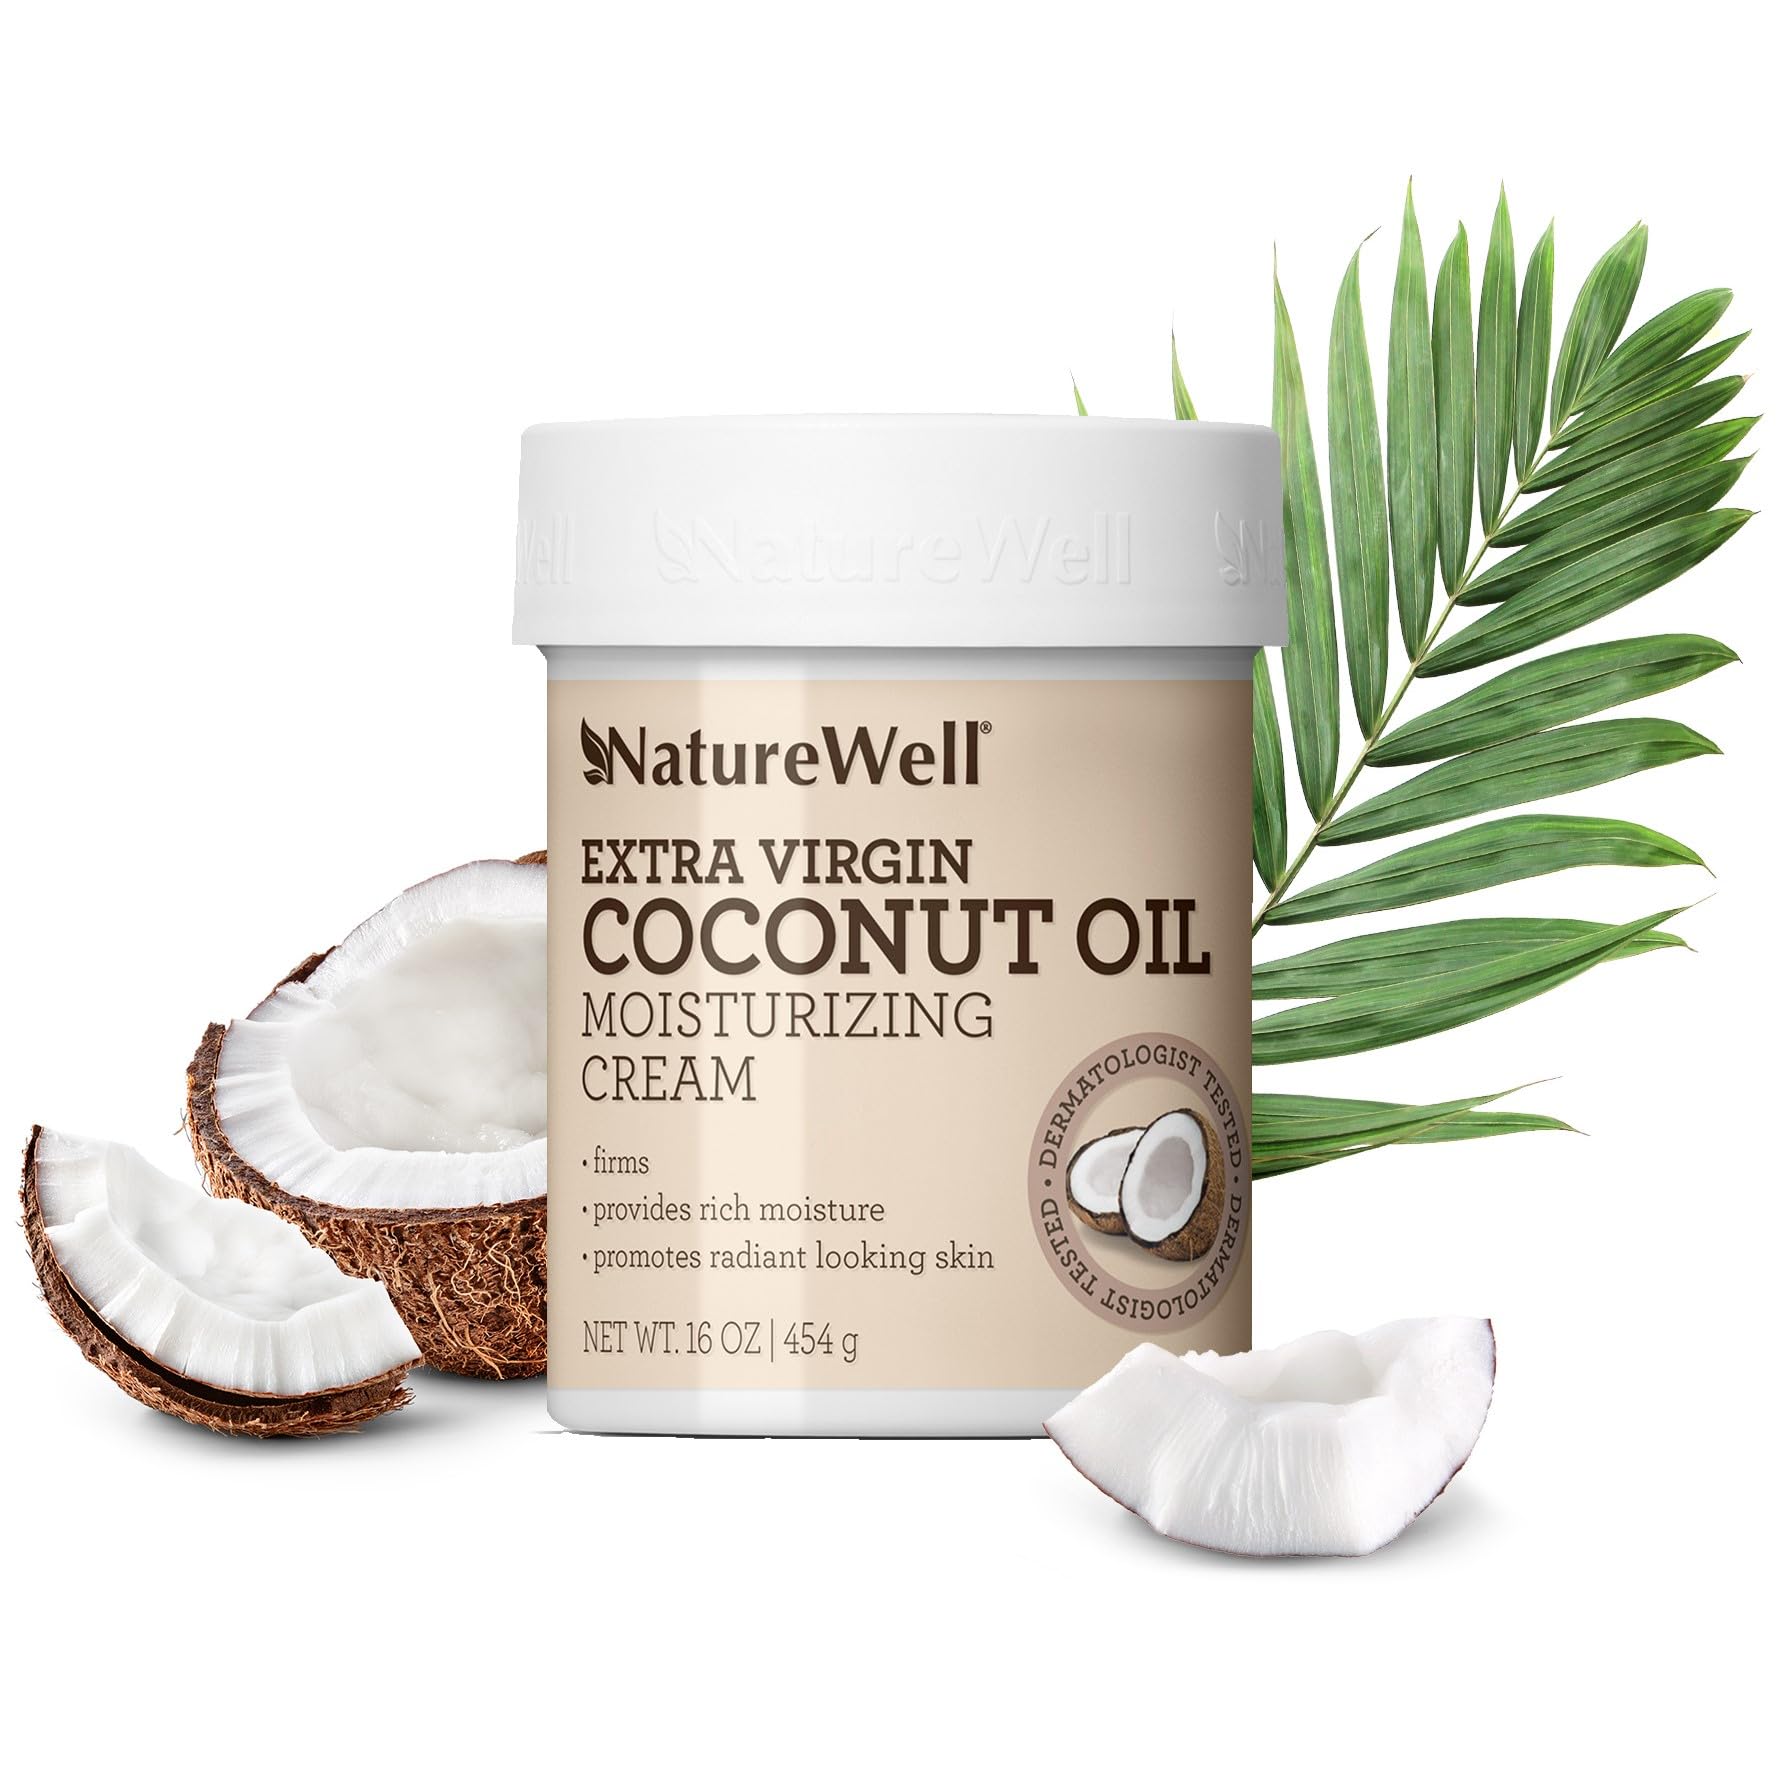 NATURE WELL Extra Virgin Coconut Oil Moisturizing Cream for Face, Body, & Hands, Anti Aging, Firming, Restores Skin's Moisture Barrier, Provides Intense Hydration For Dry & Dull Skin (16 Oz)